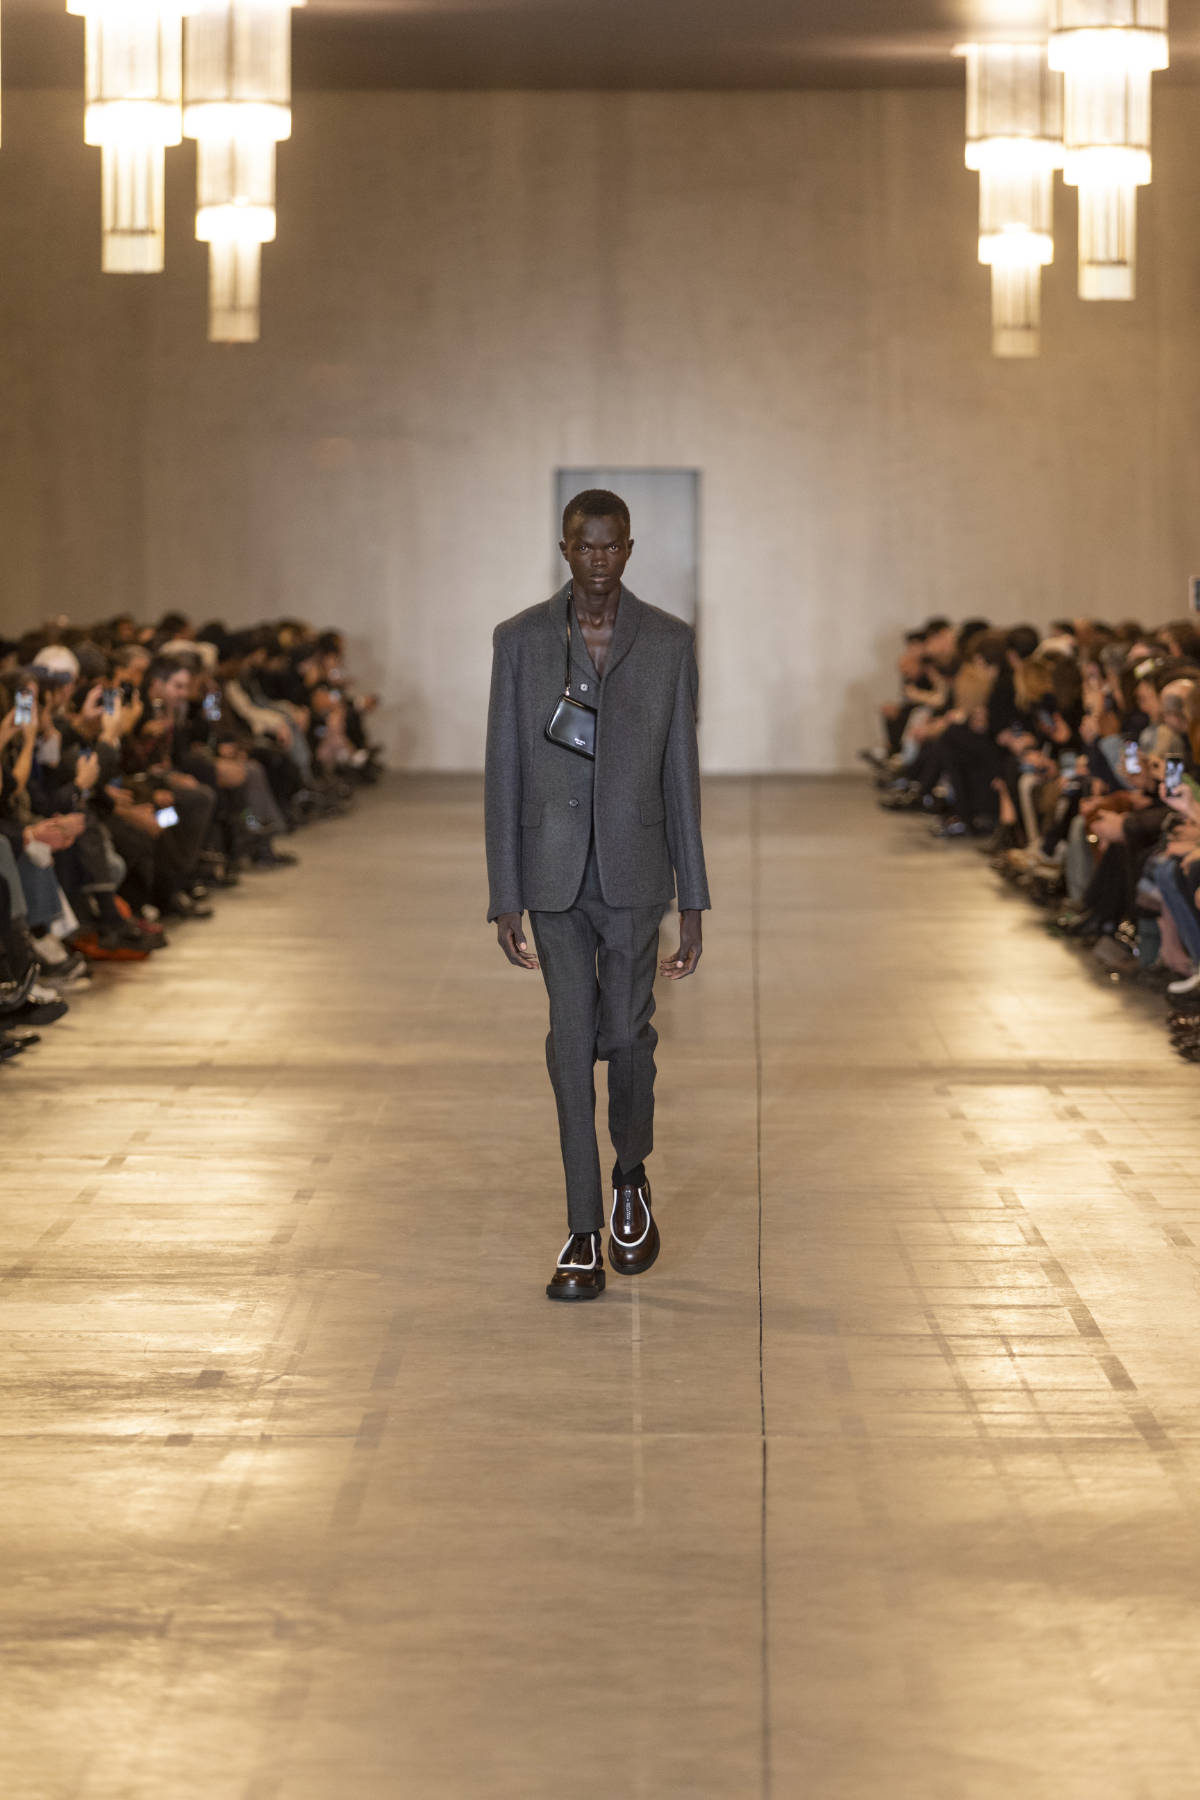 Prada Presents Its New Fall/Winter 2023 Menswear Collection: Let’s Talk About Clothes